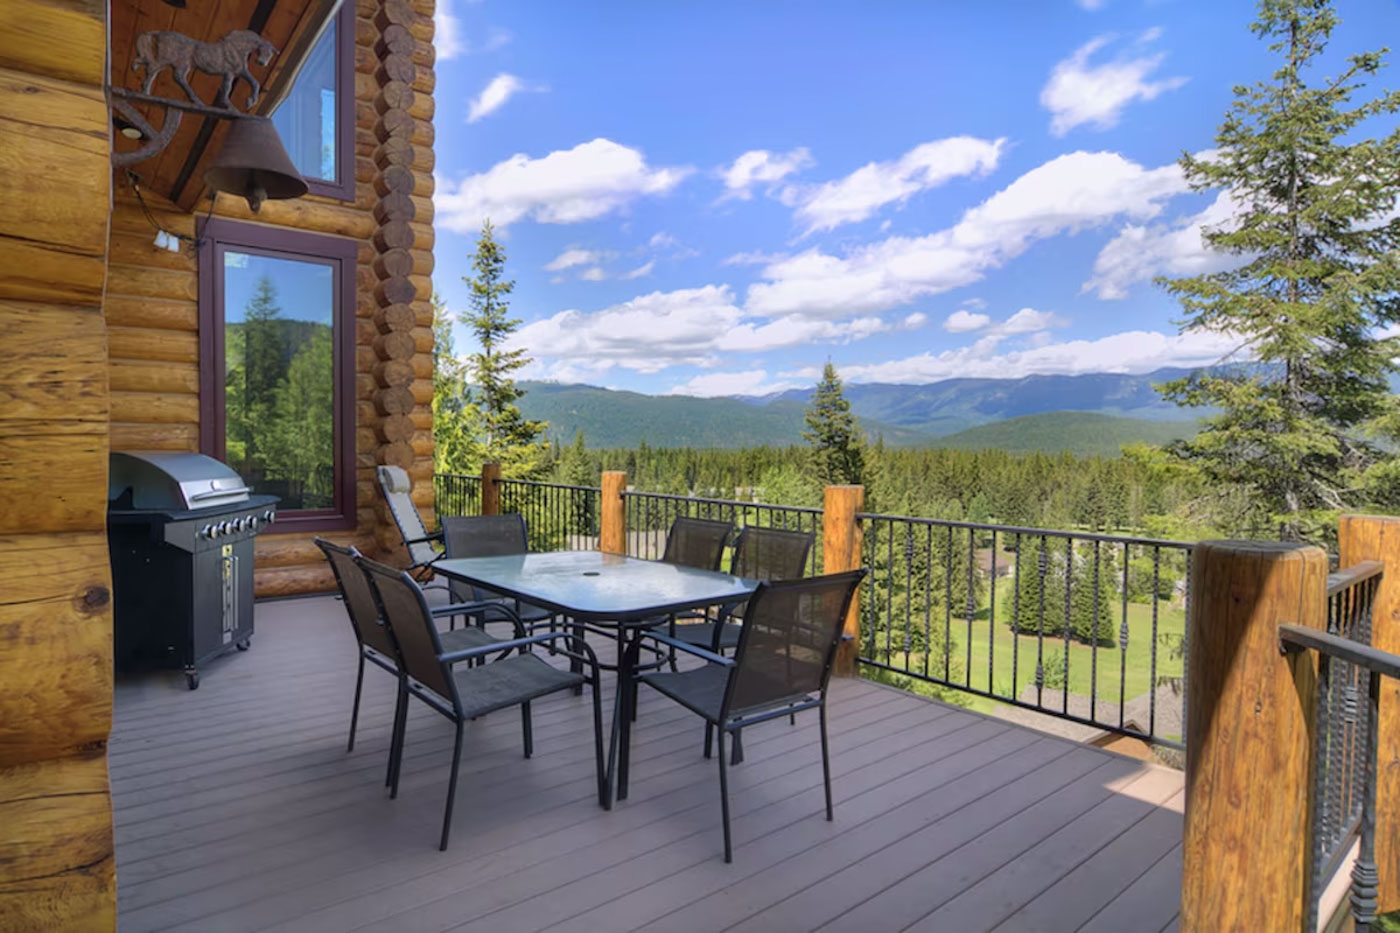 A gas BBQ and patio furniture on the decking of the Lux Lodge with a view over the forest on a sunny day.